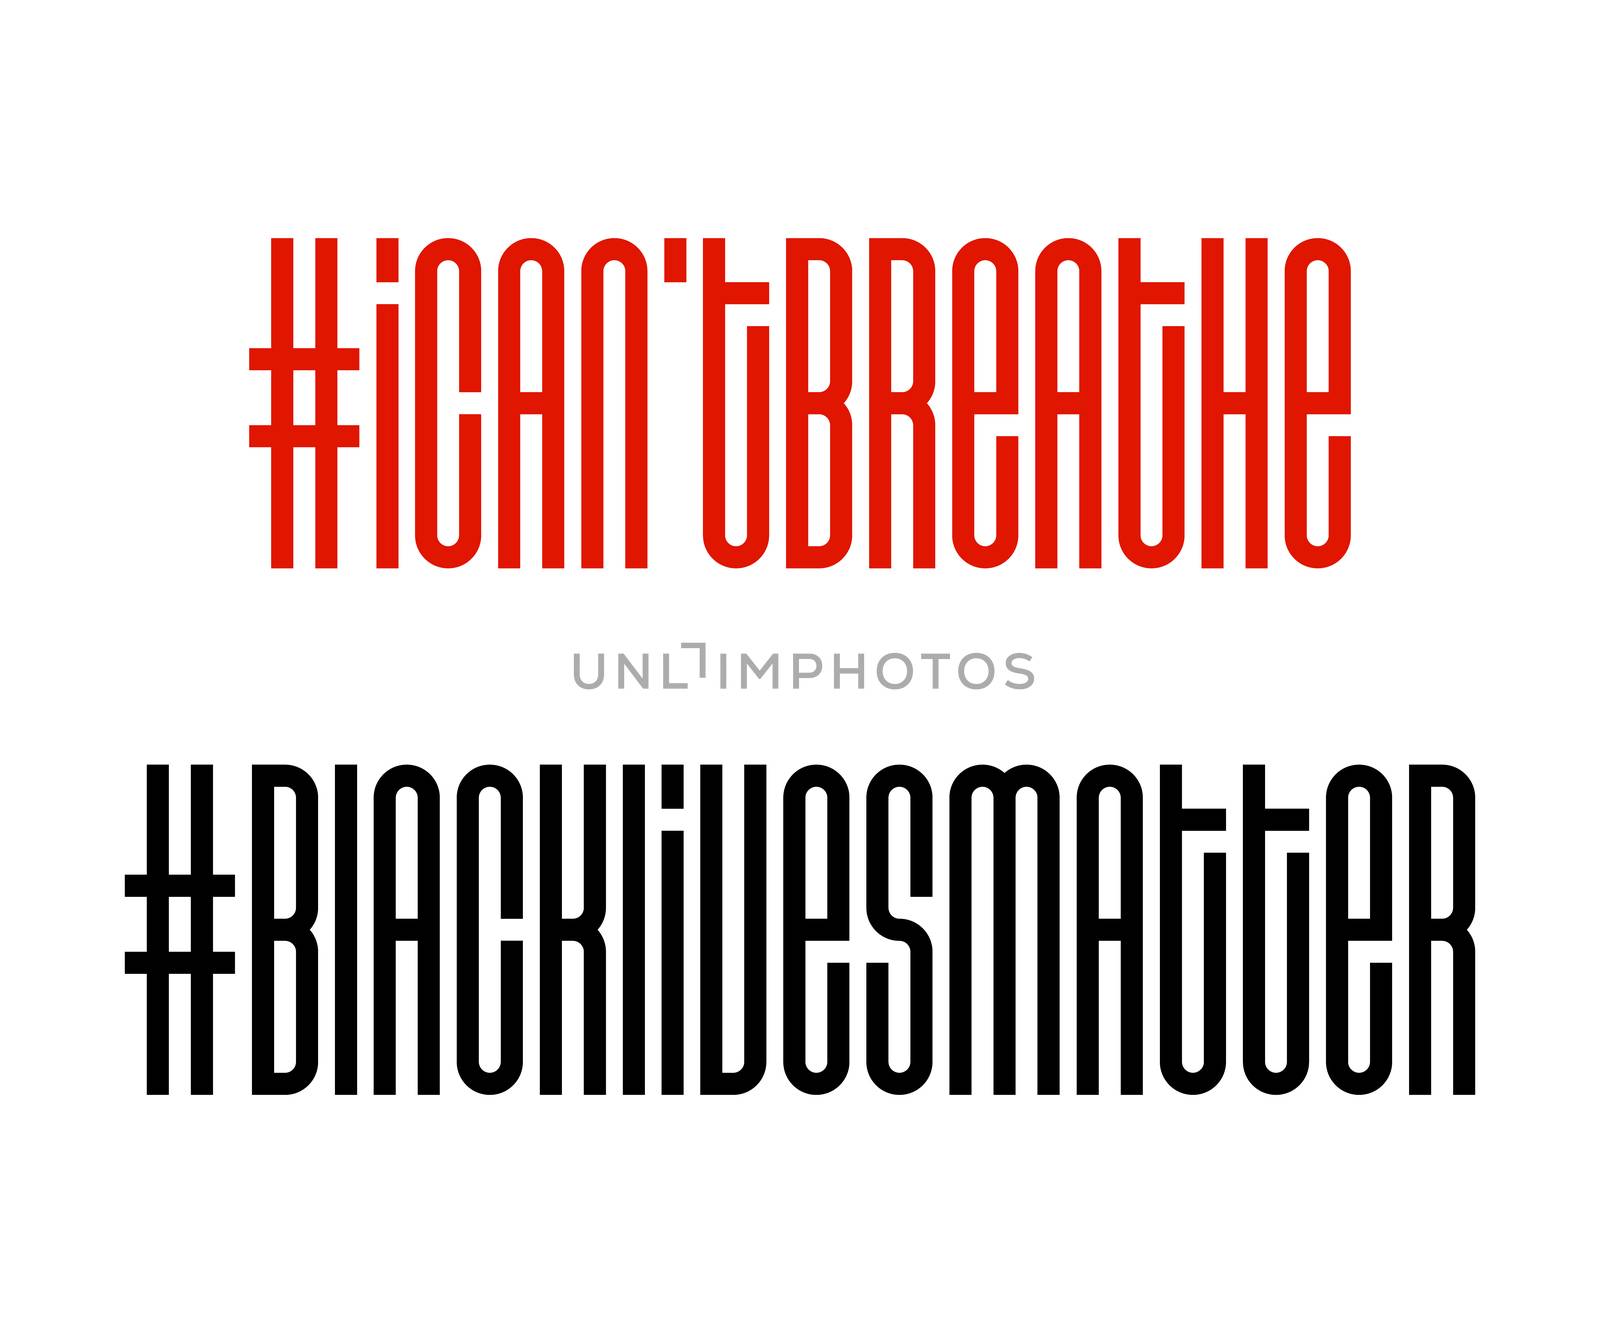 I Can't Breathe and Black Lives Matter. Protest Banner about Human Right of Black People in U.S. America. Vector Illustration. Icon Poster and Symbol. by lunarts